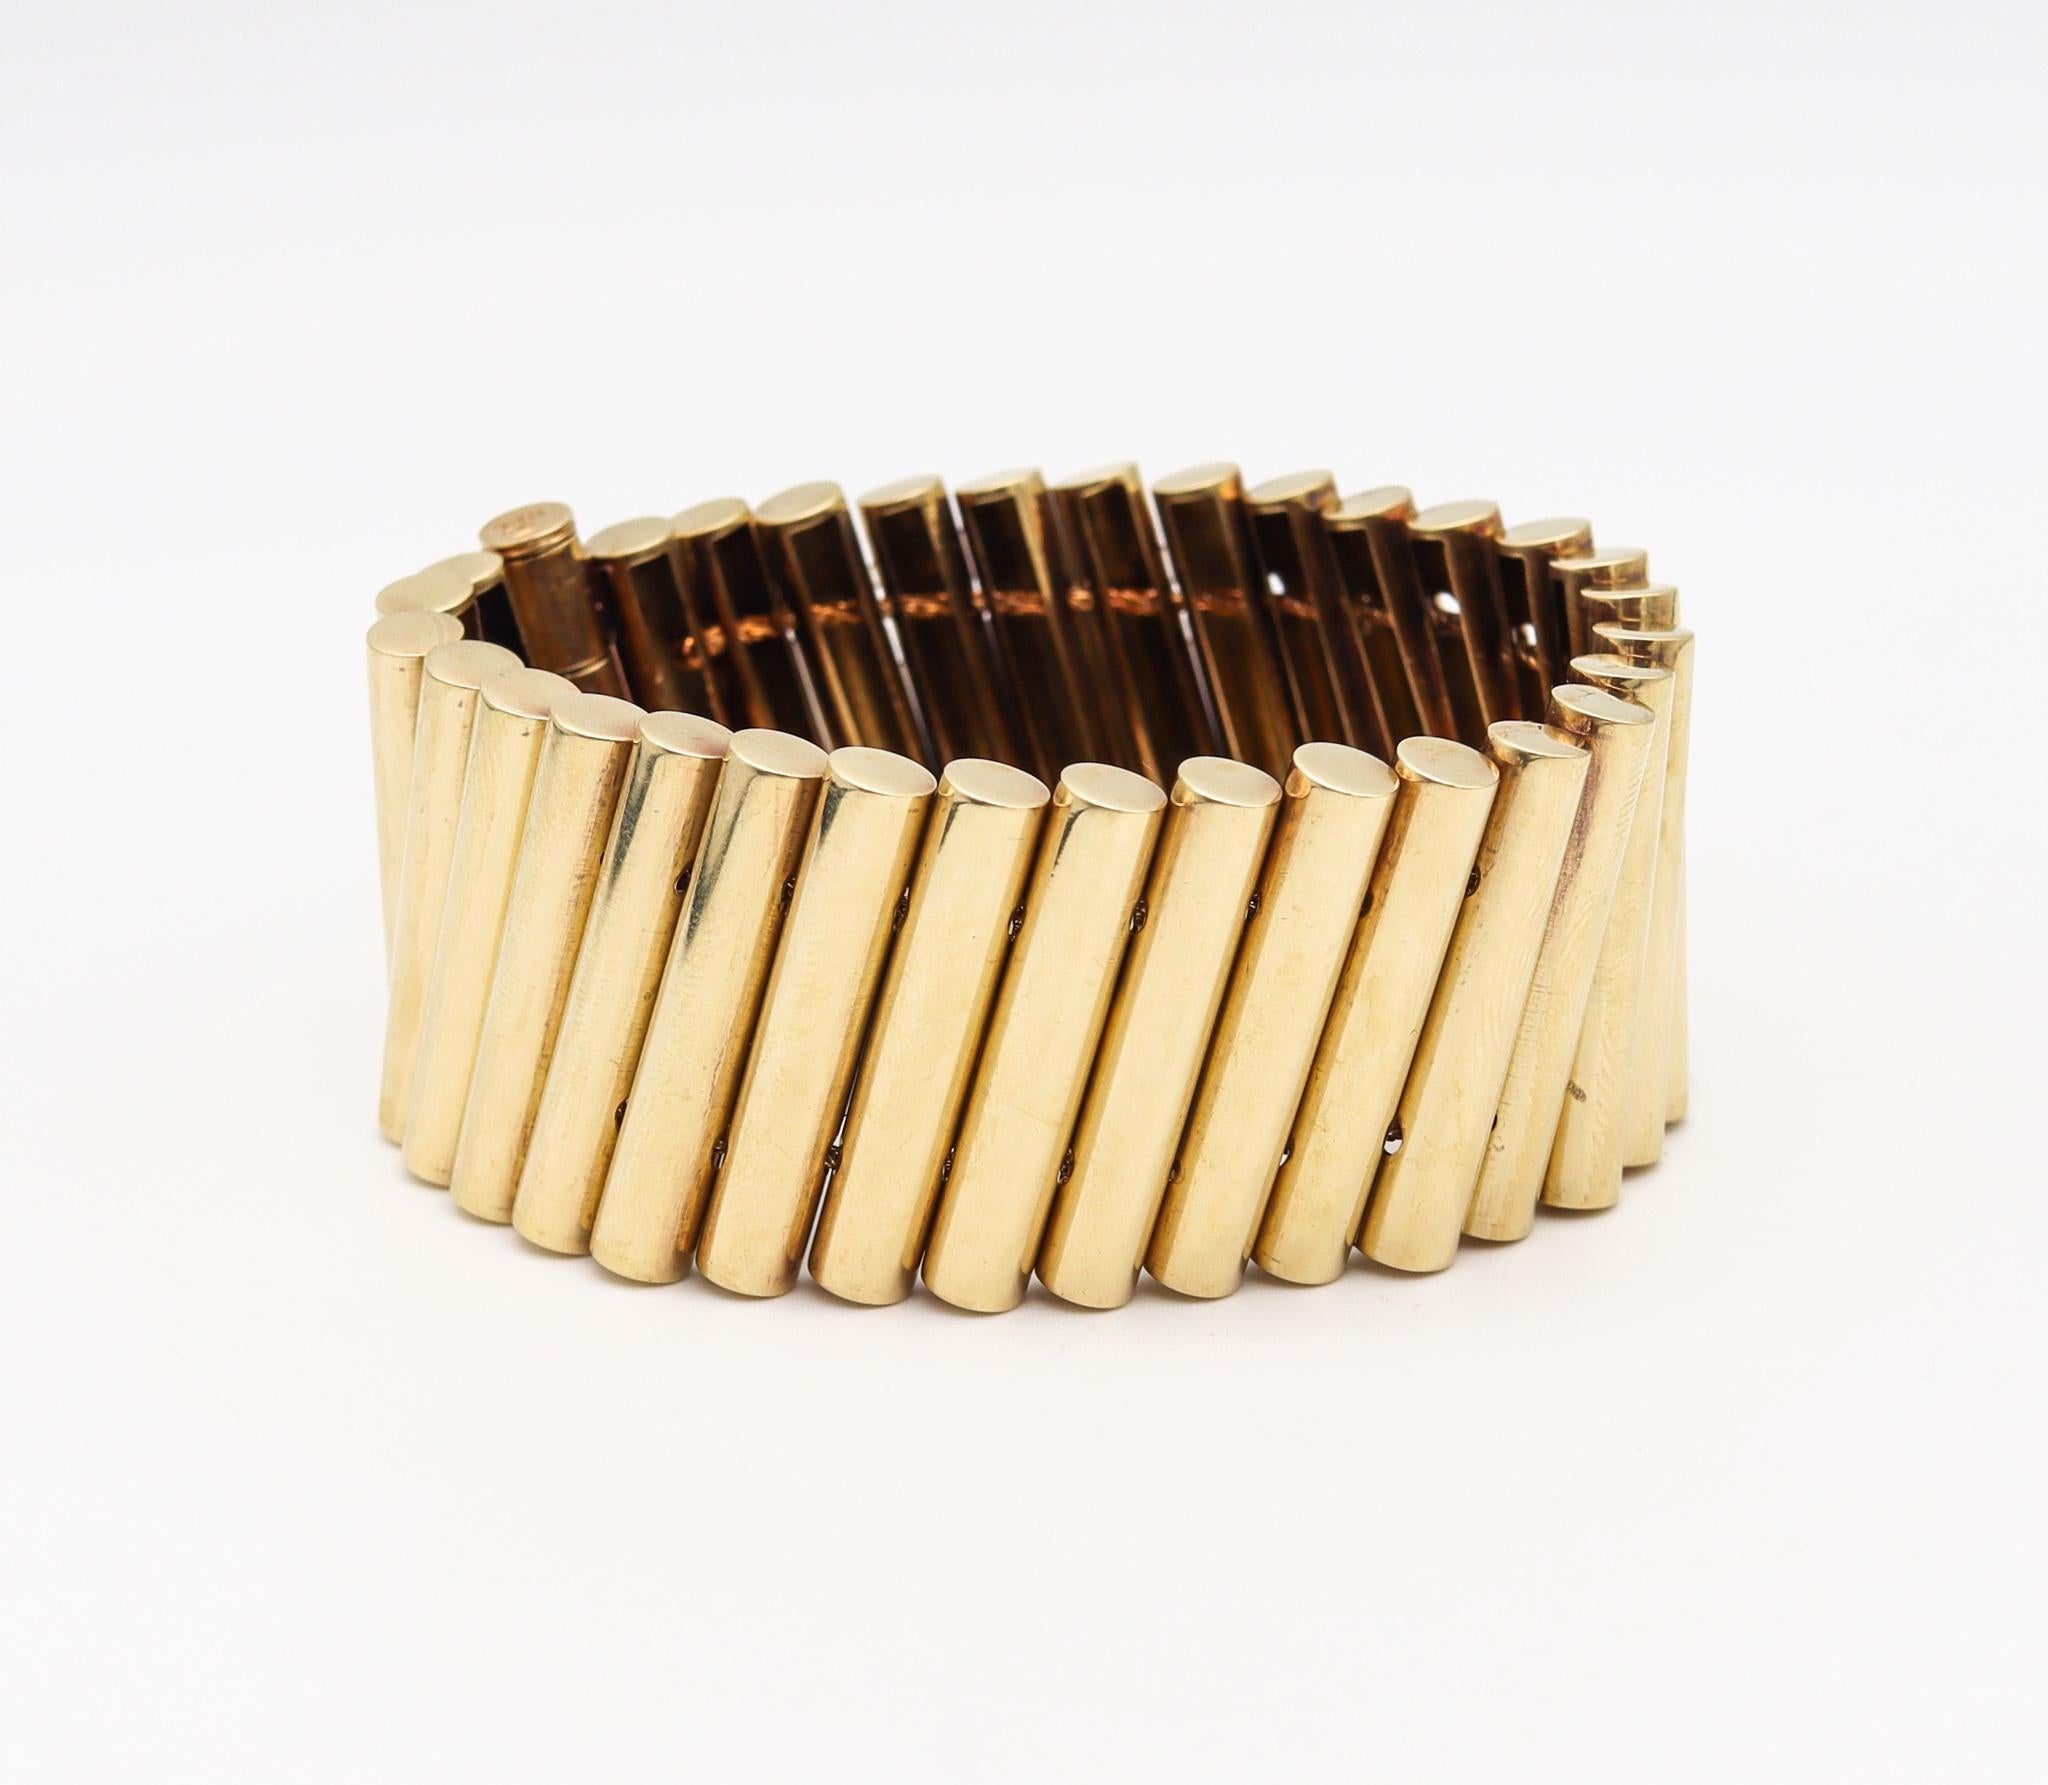 An Italian post war geometric retro bracelet.

Very elegant retro-modernist piece, created in Italy during the post war period, back in the 1950. This beautiful sleek bracelet was carefully crafted with tubular round elements in solid yellow gold of